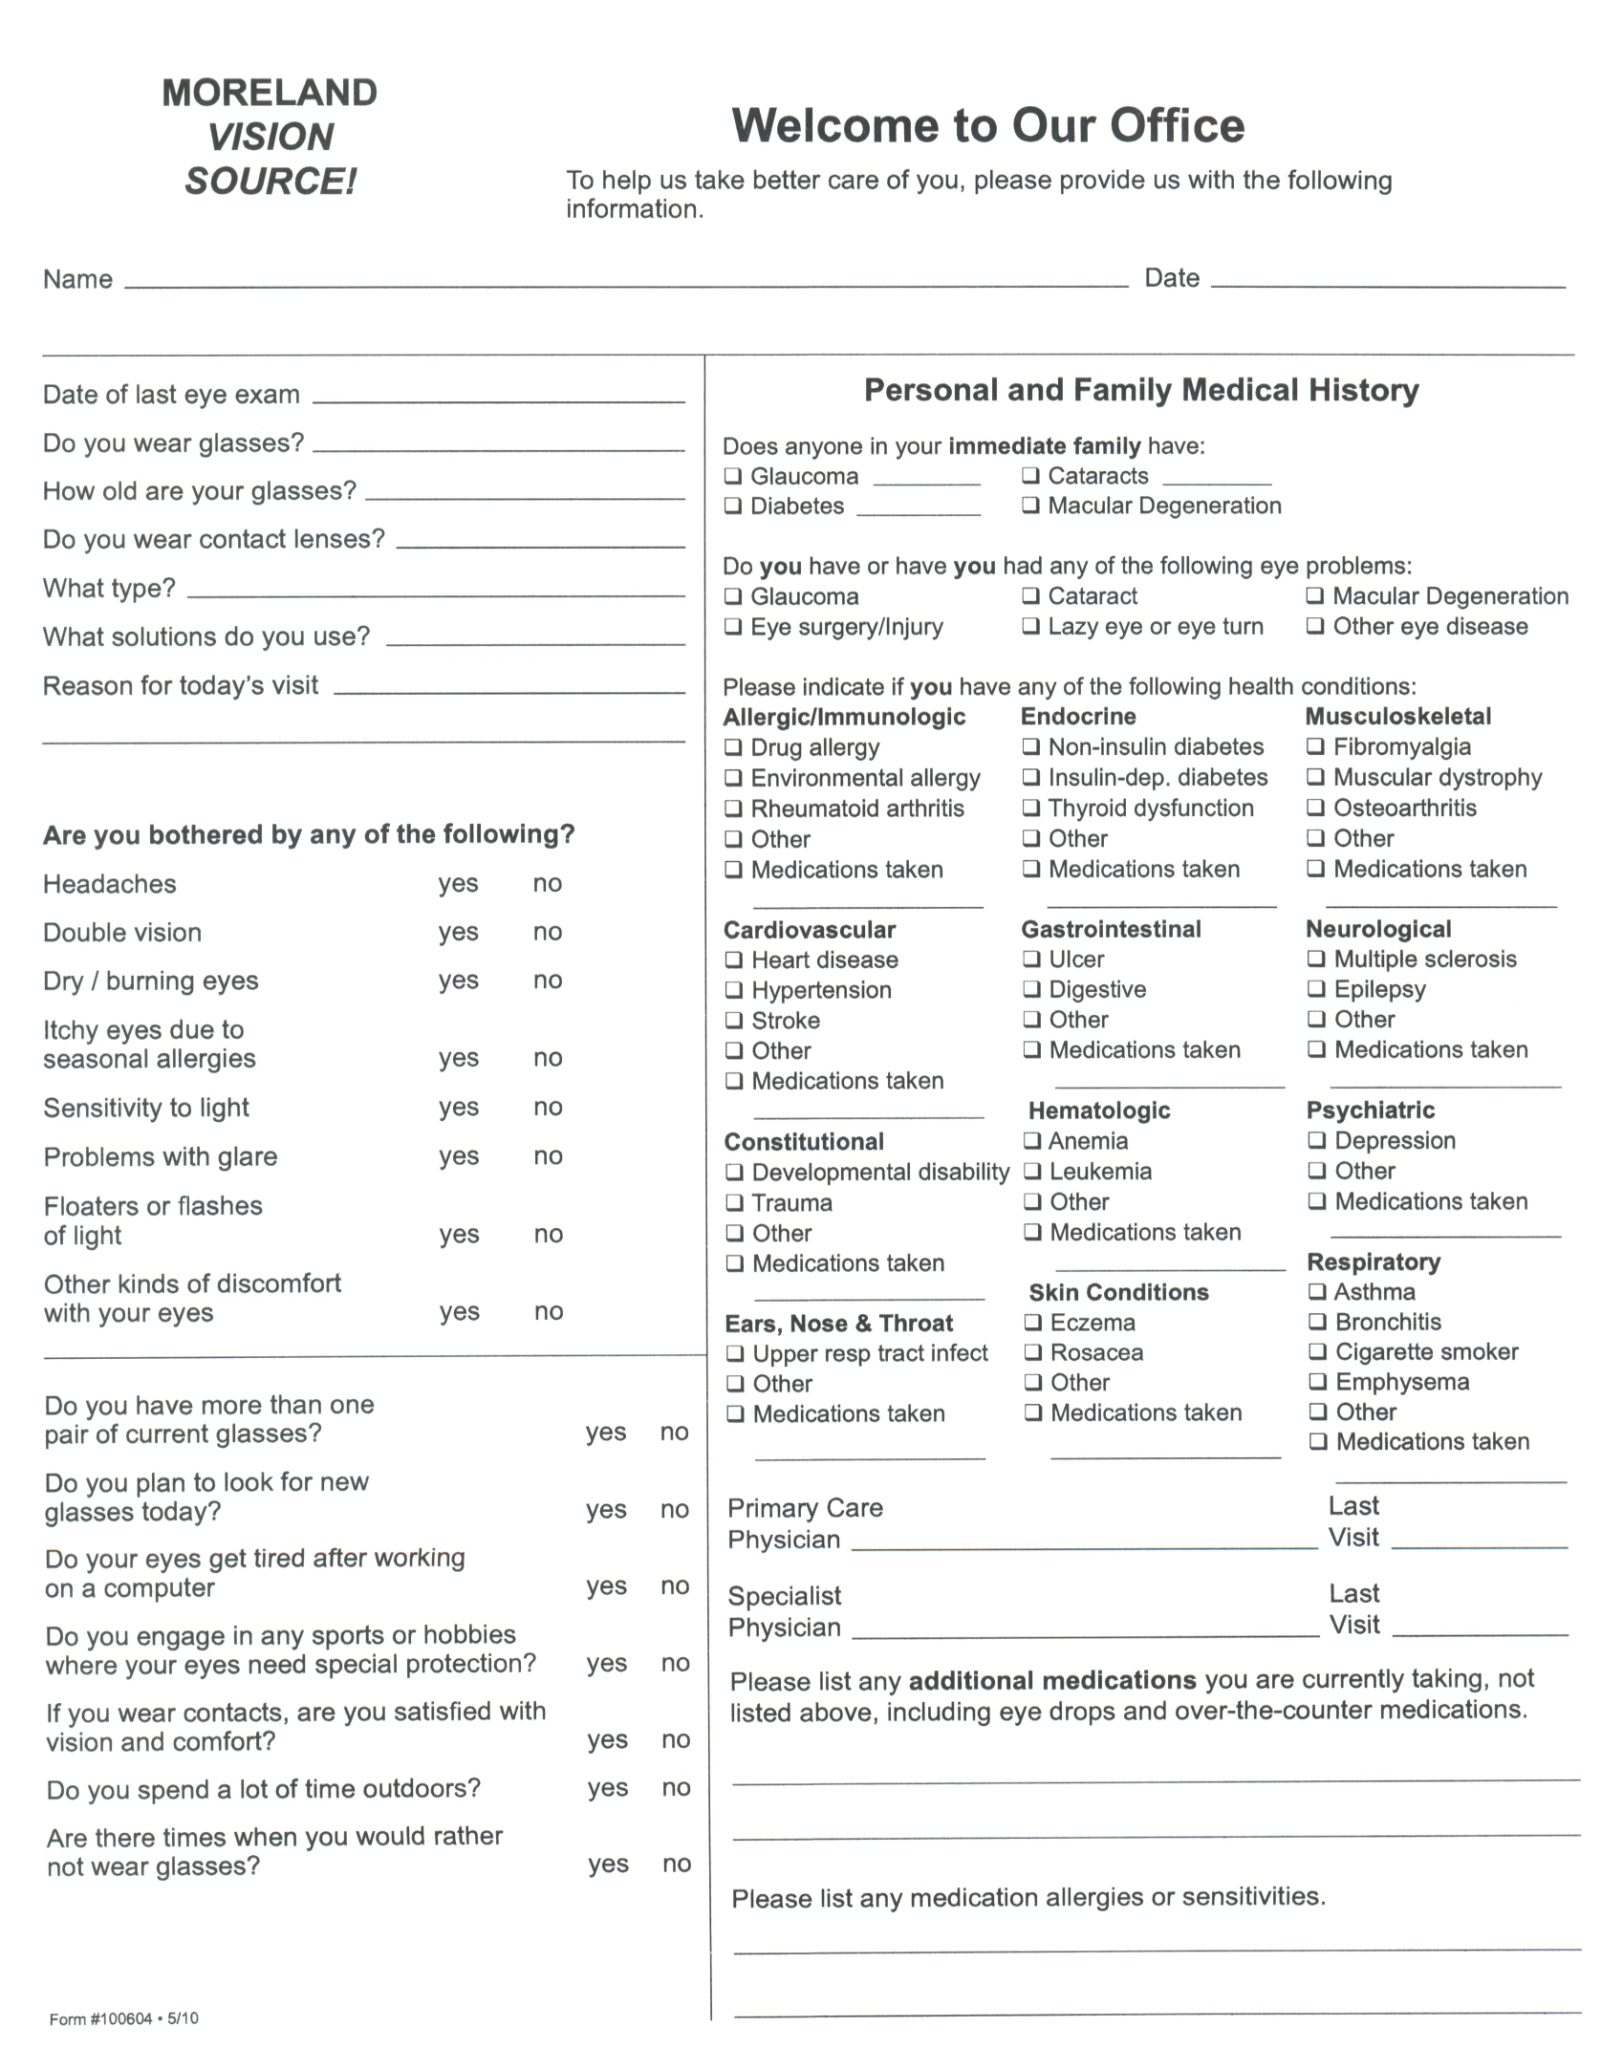 veterinary physical exam form example